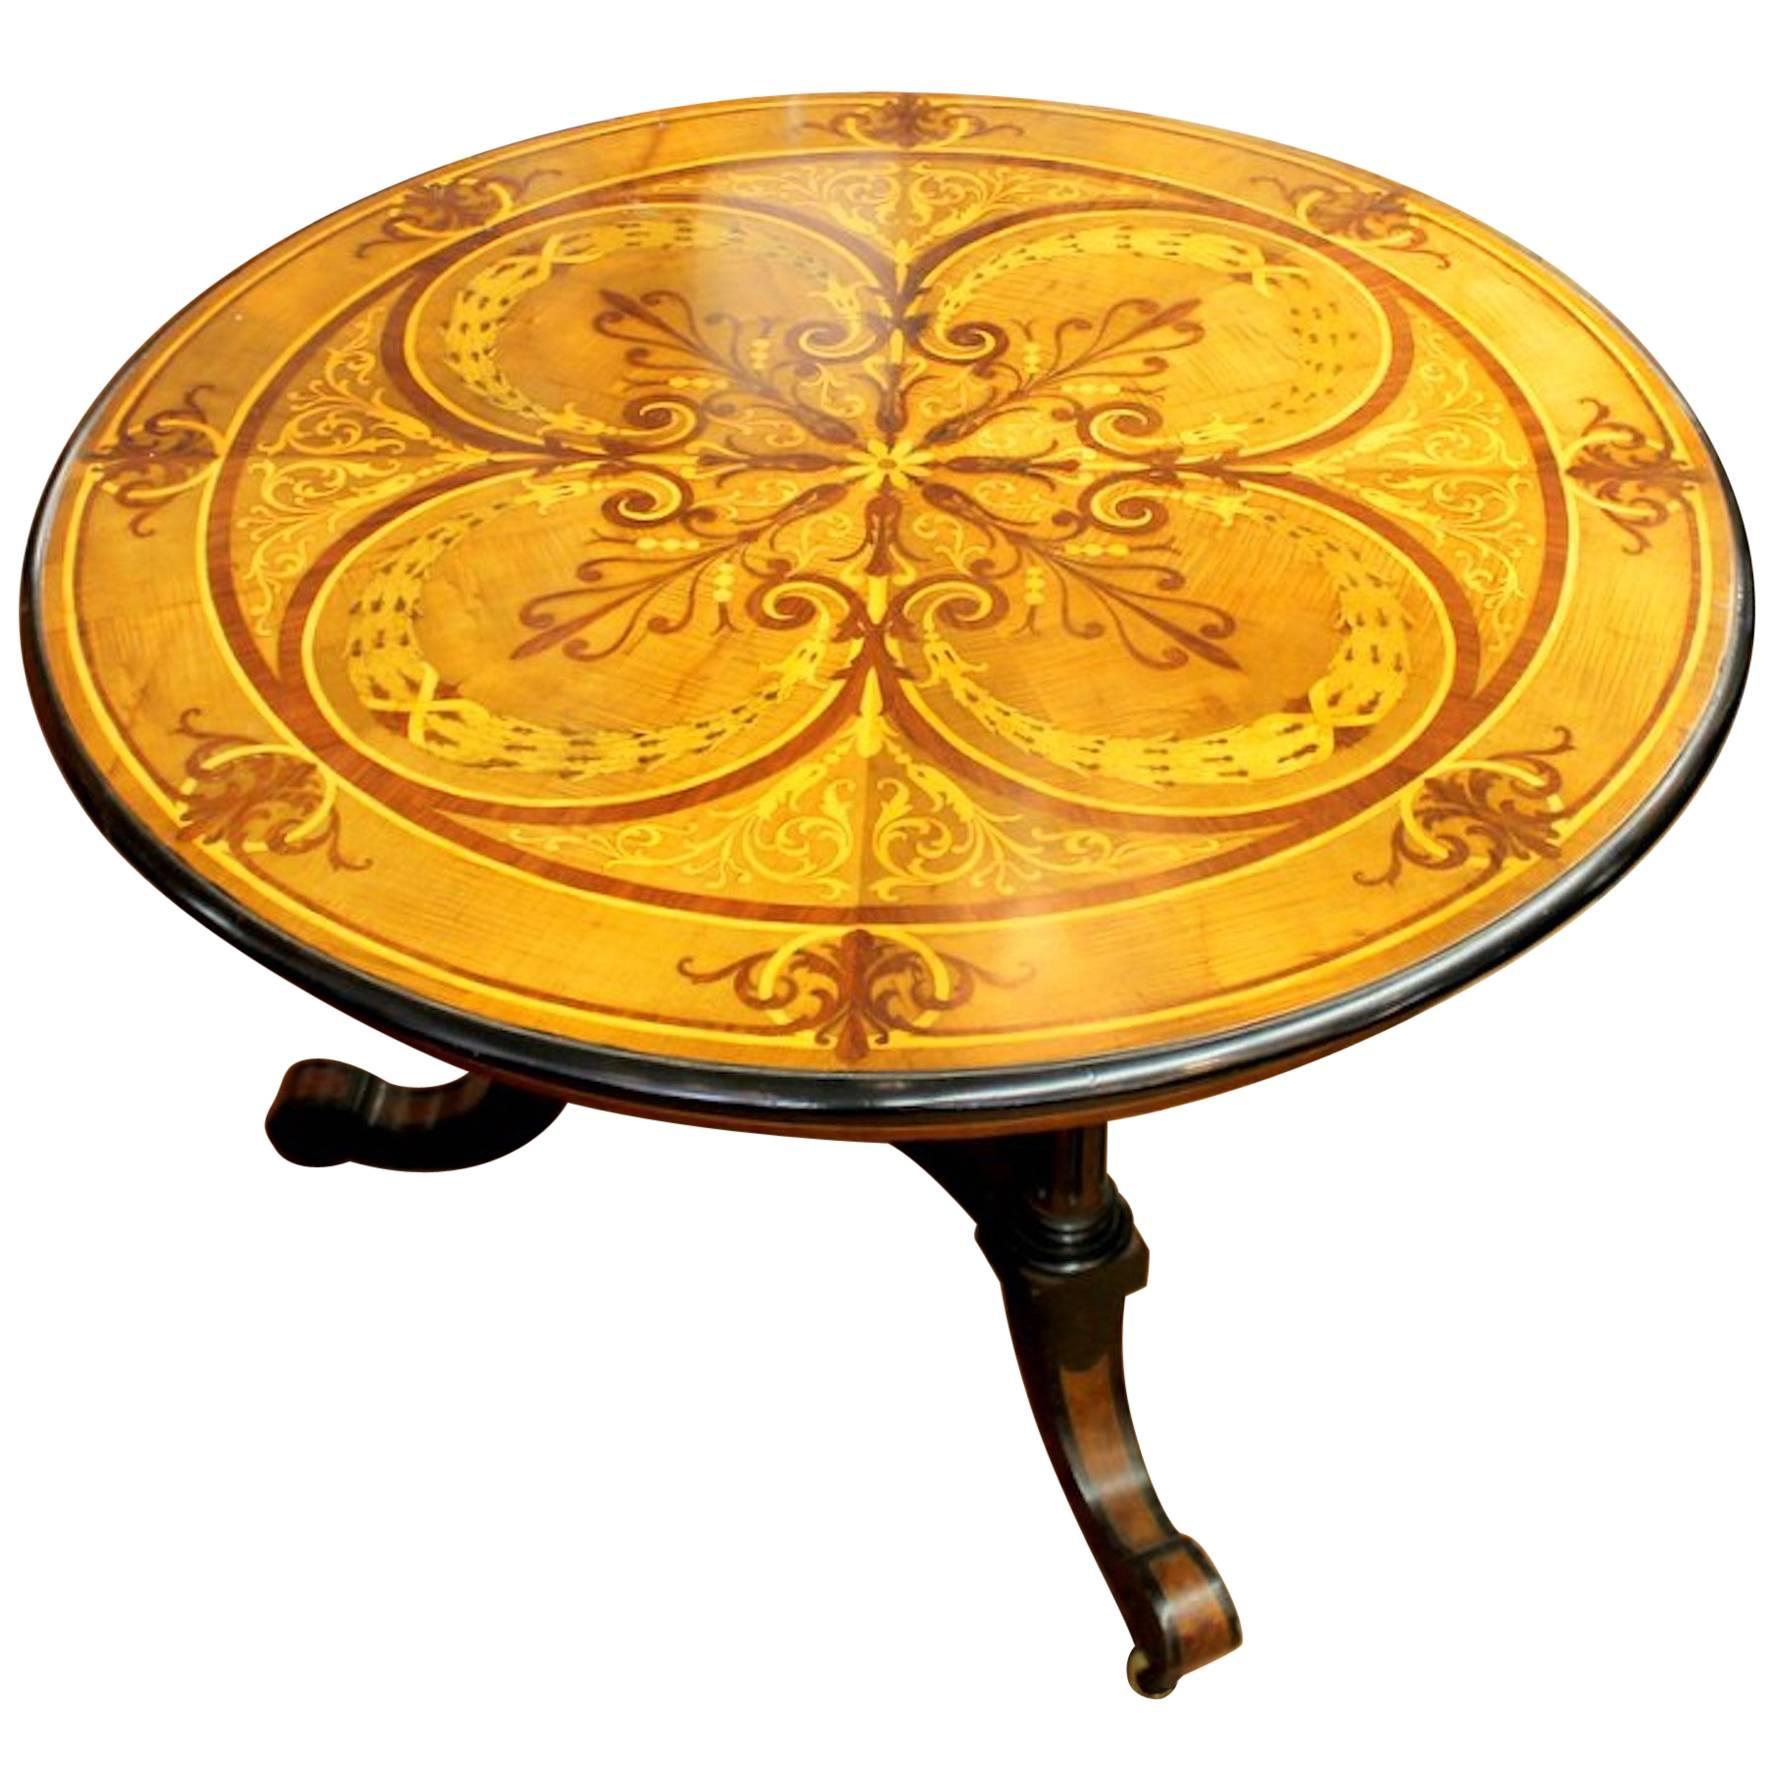 Antique English Marquetry Inlaid Specimen or Centre Table, Aesthetic Movement